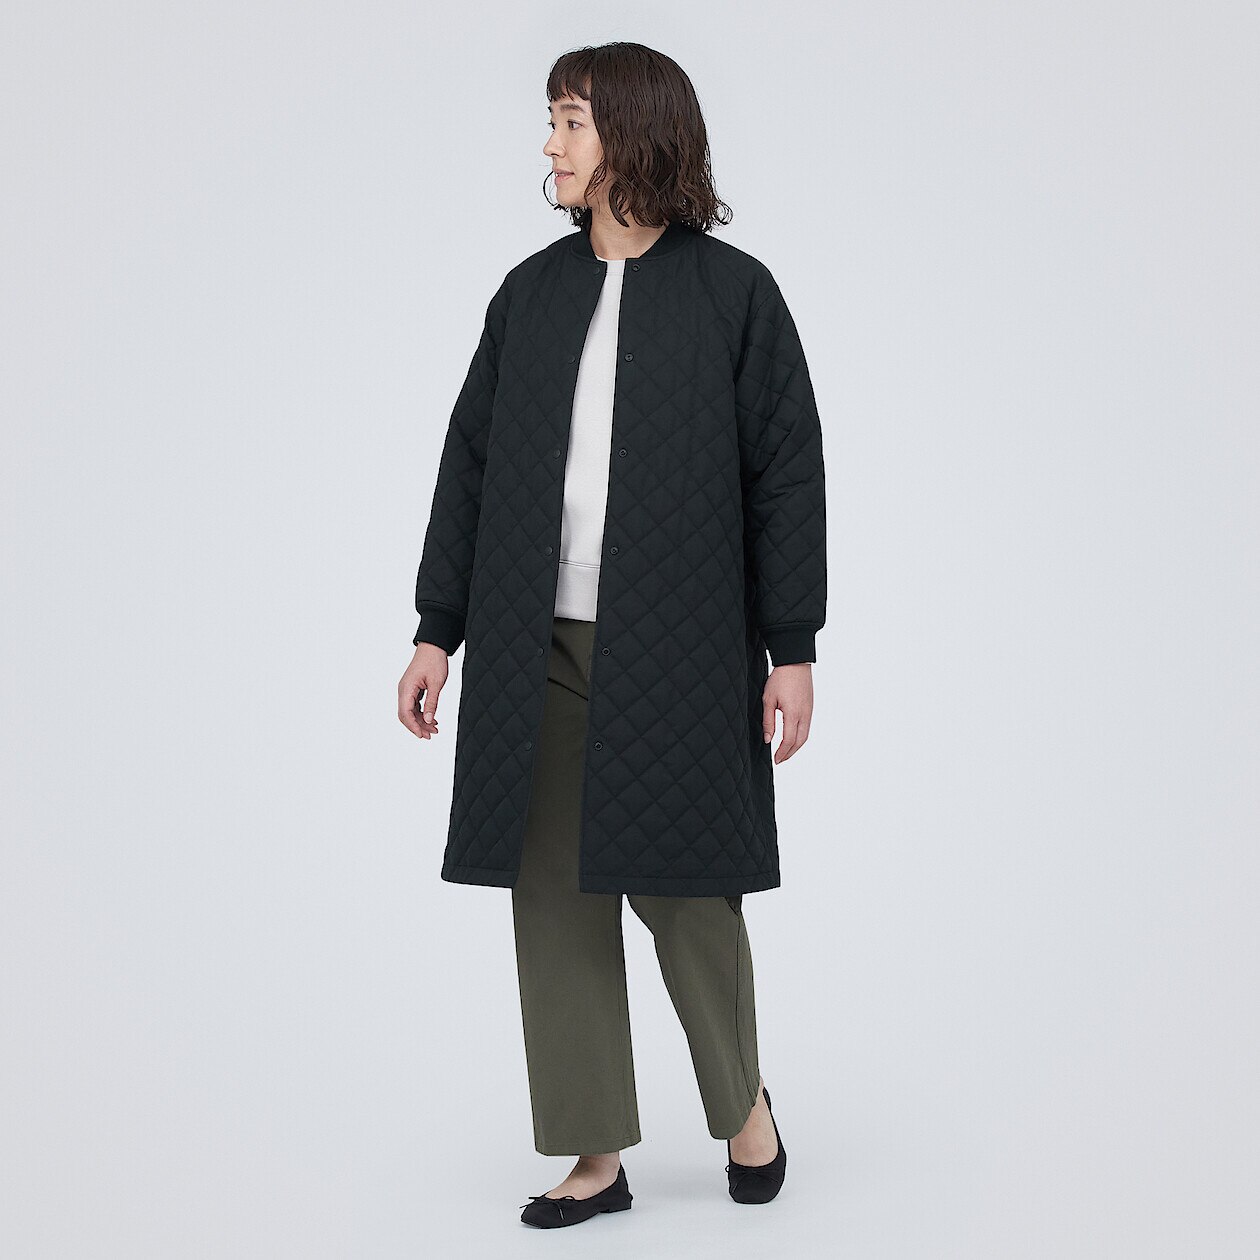 Women's Padded Quilted coat